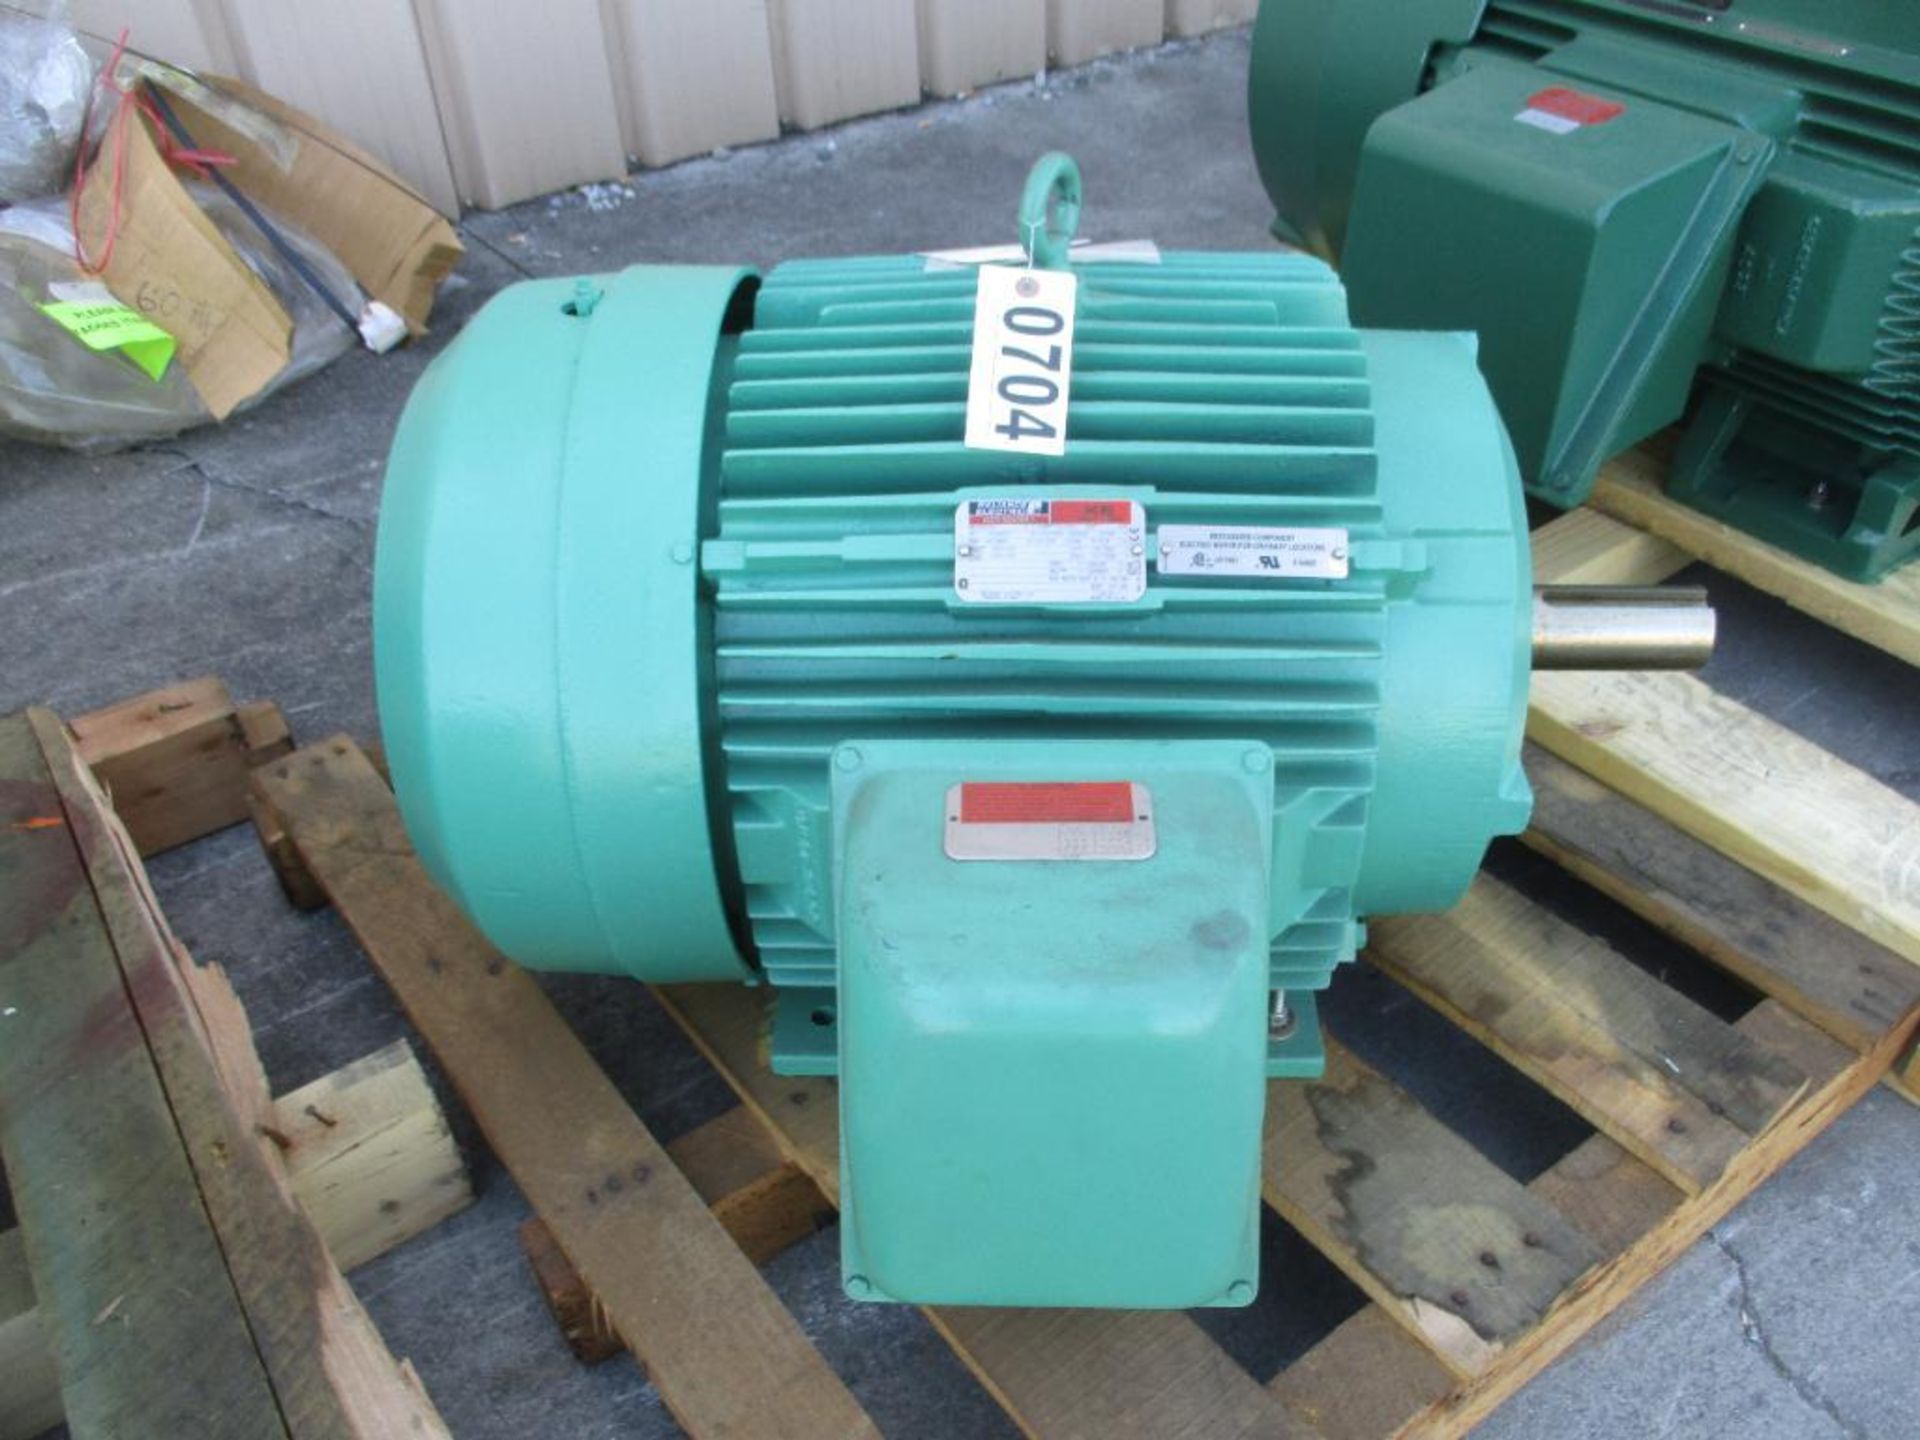 RELIANCE ELECTRIC DUTY MASTER P36B3326H 60HP 1780RPM 364T FRAME 3 PHASE MOTOR 840# LBS (THIS LOT IS